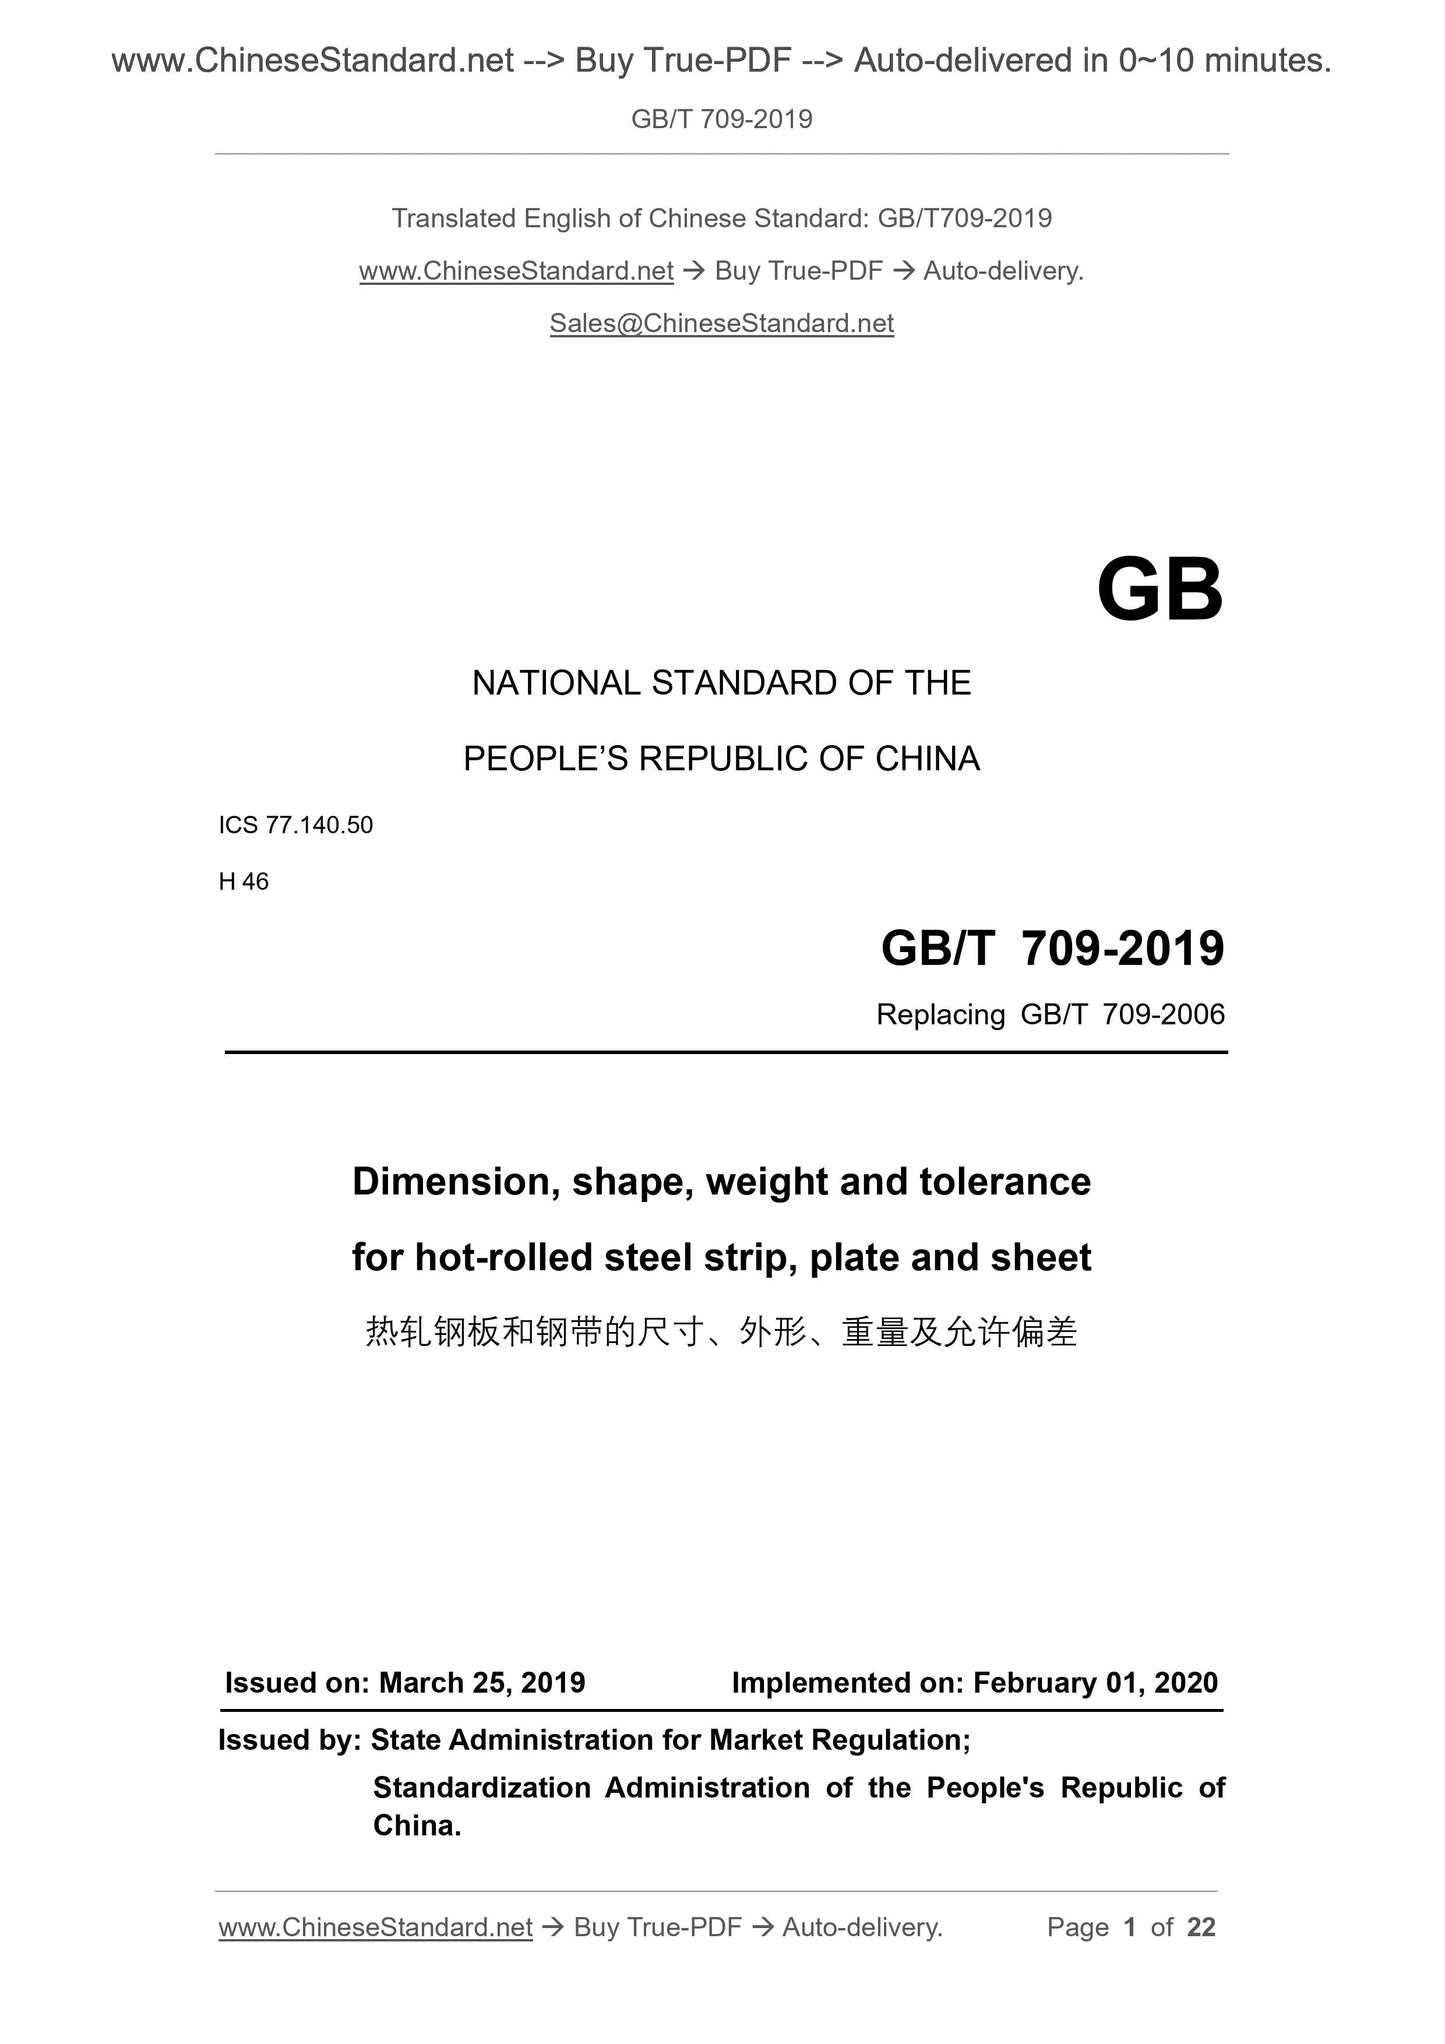 GB/T 709-2019 Page 1